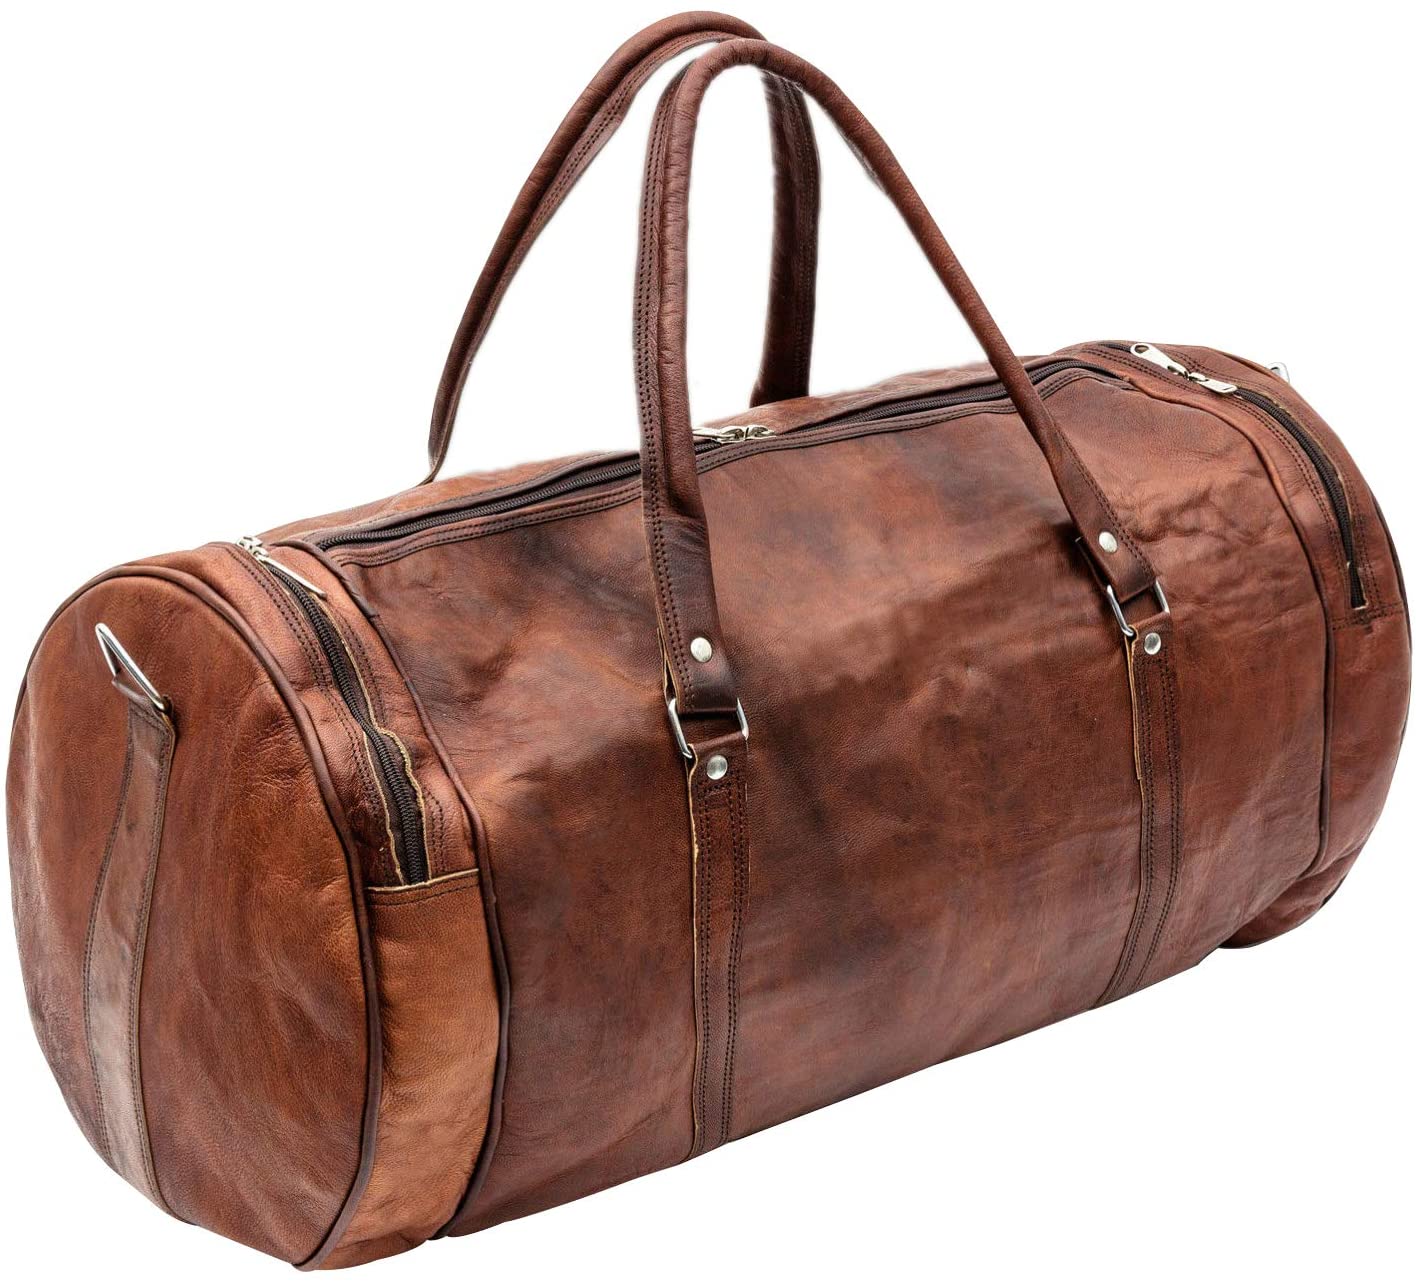 Vintage brown Leather Duffel Bag Rounded